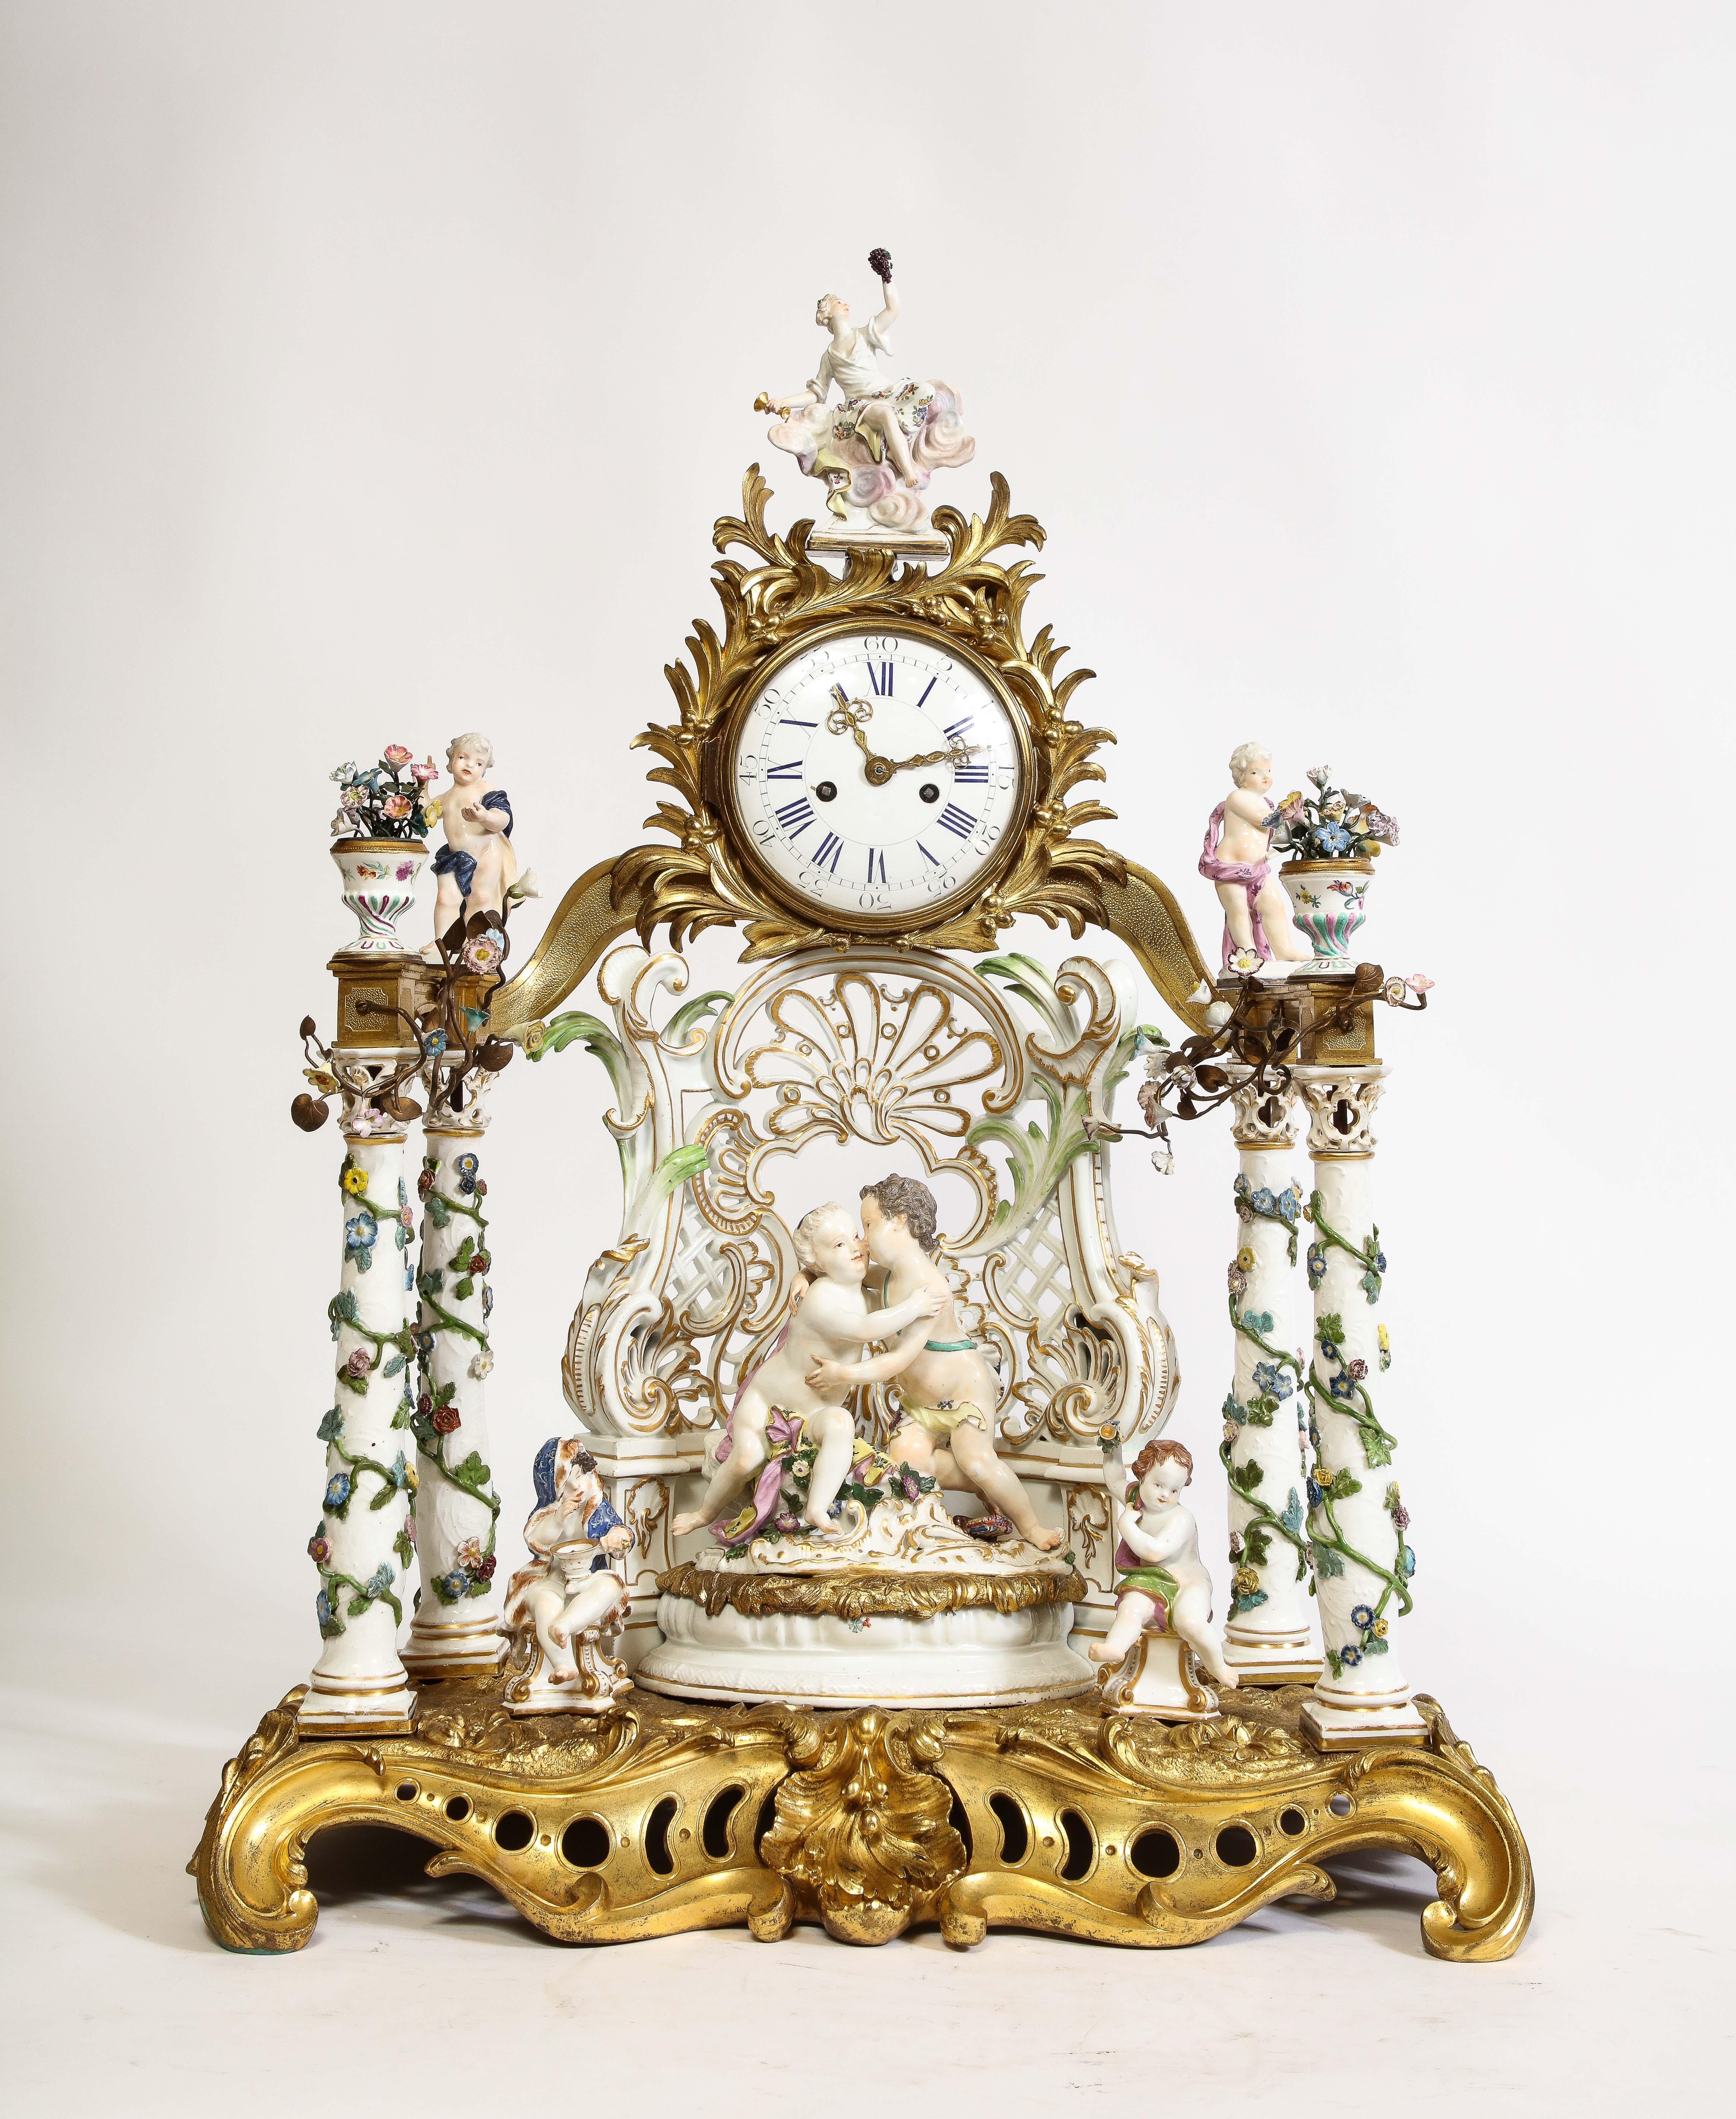 A Very Large and Rare German Ormolu Mounted Meissen Porcelain Three Piece Clock & Candelabra Garniture Set. This impressive set consists of three pieces: a center clock and two candelabras, each adorned with the most intricate and delicate details